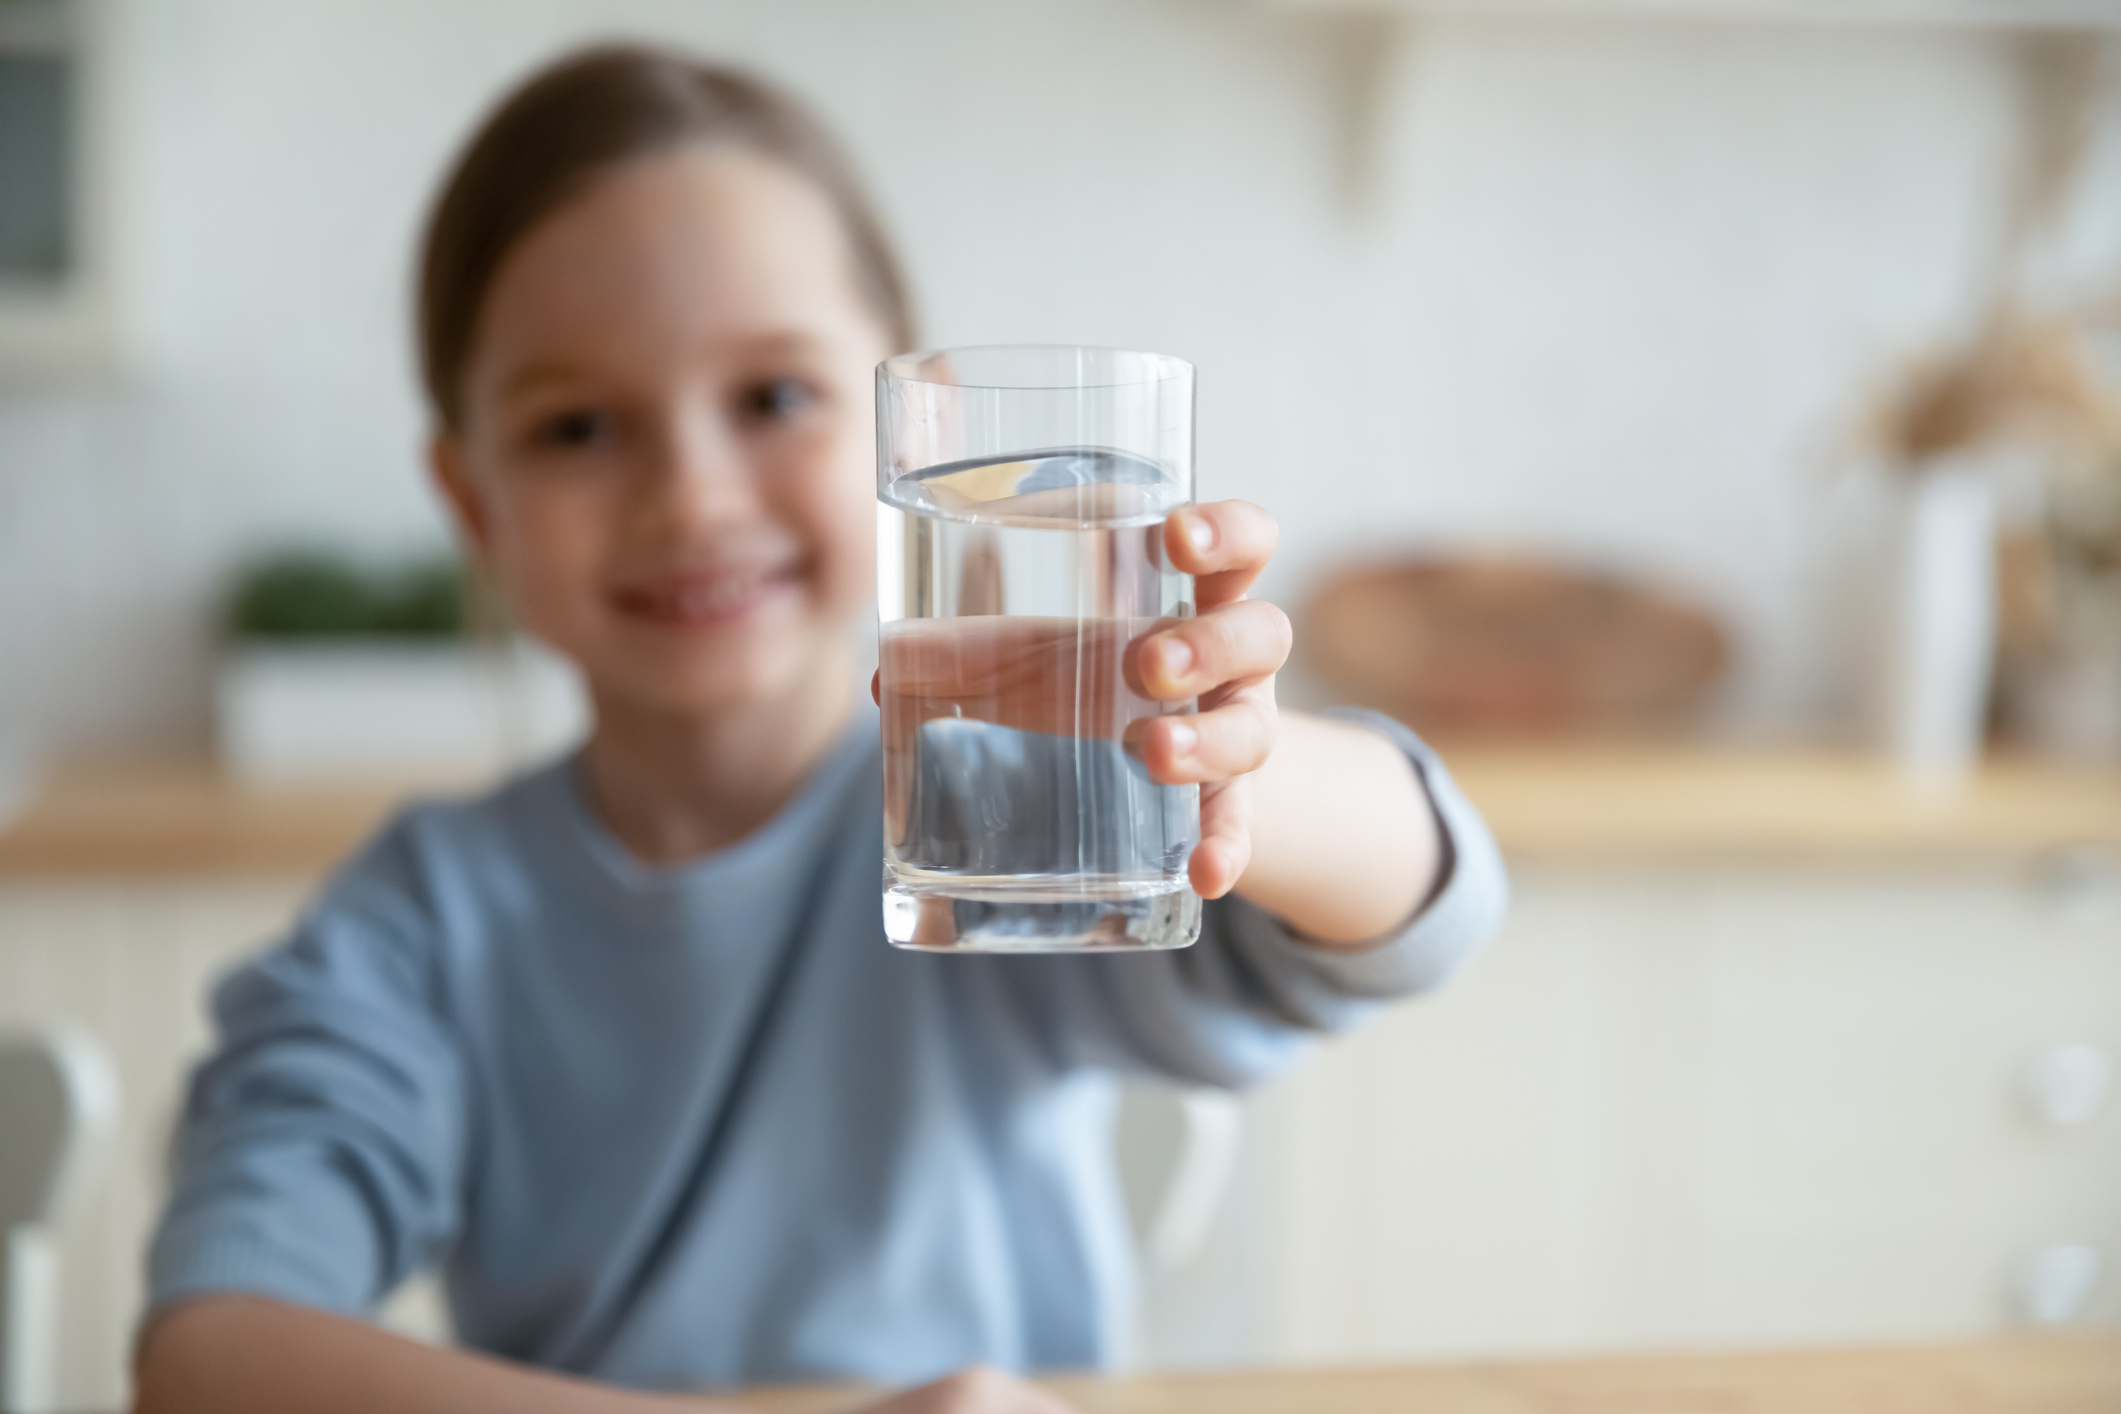 Girl Holding Clean Glass of Water